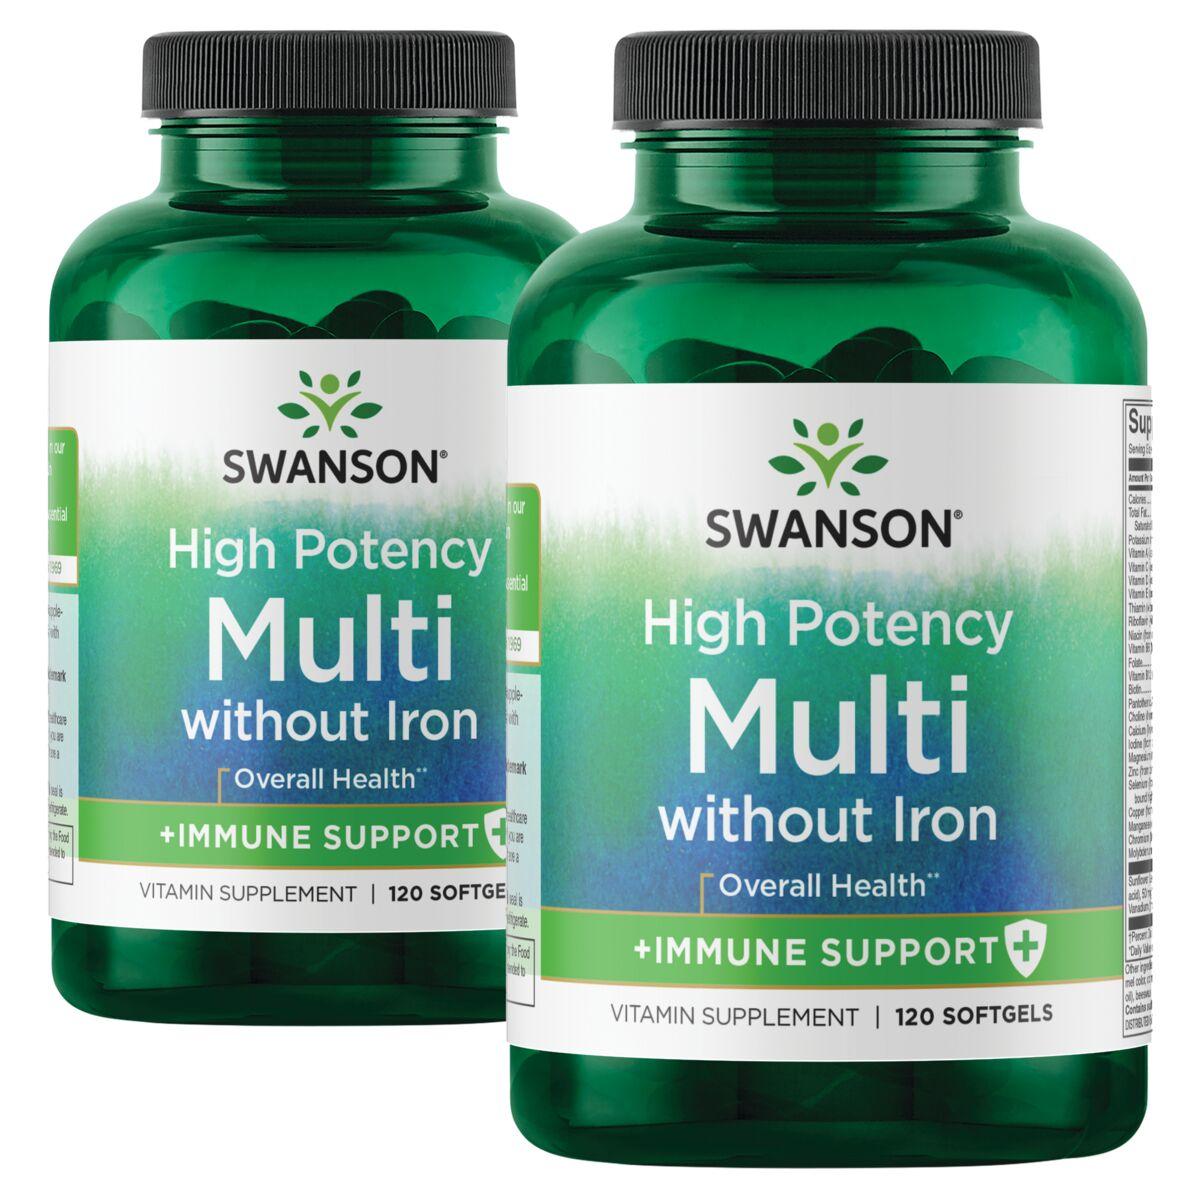 Swanson Premium High Potency Multi plus Immune Support - Without Iron 2 Pack Vitamin 120 Soft Gels Per Bottle